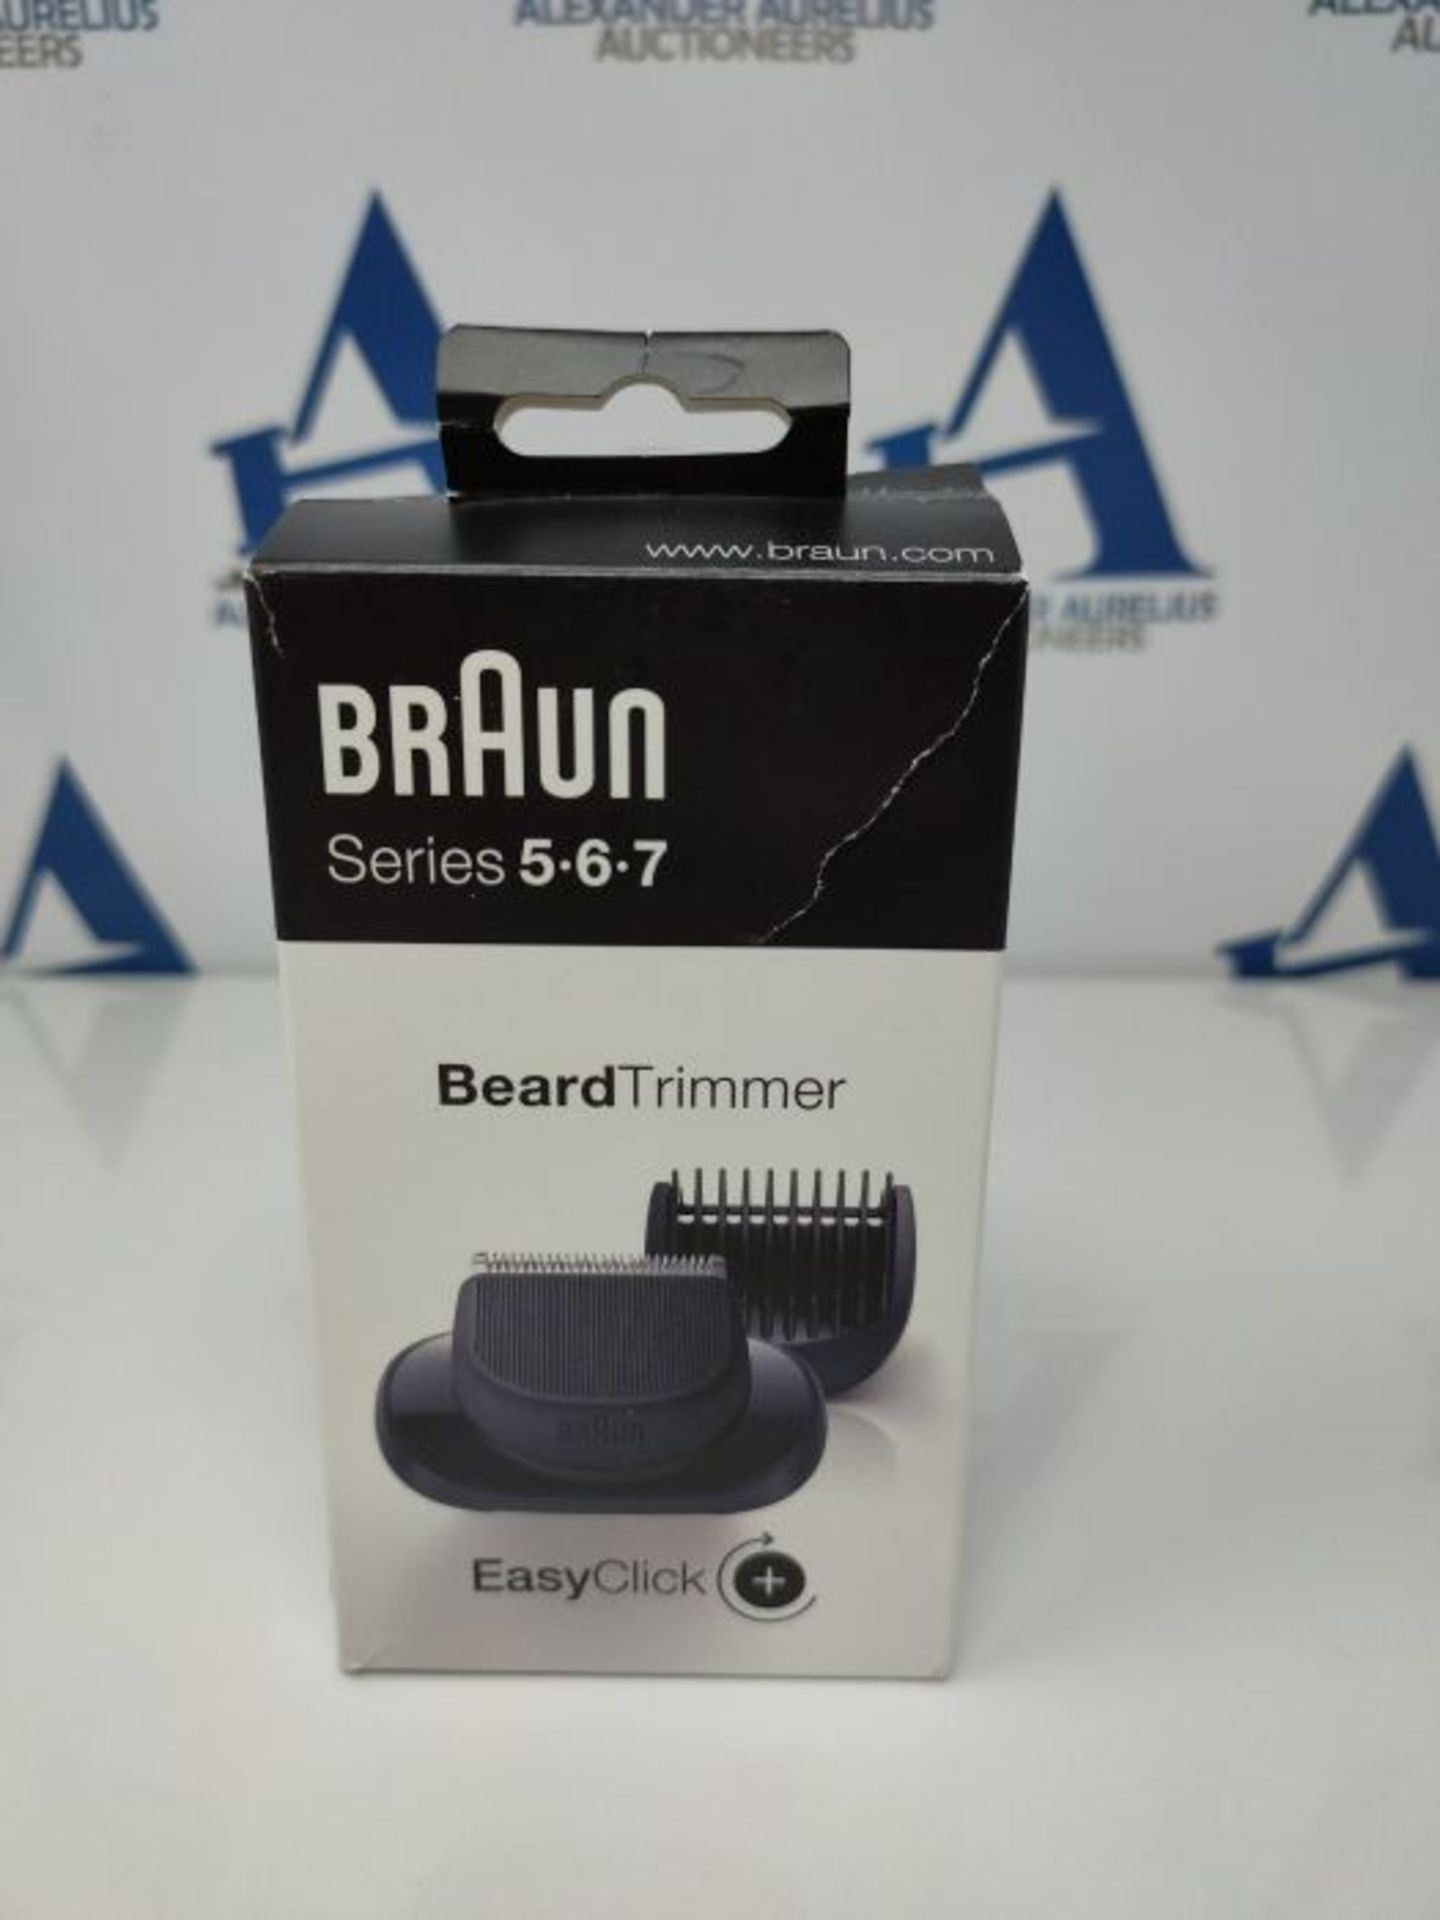 Braun EasyClick Beard Trimmer Attachment For New Generation Series 5, 6 and 7 Electric - Image 2 of 3